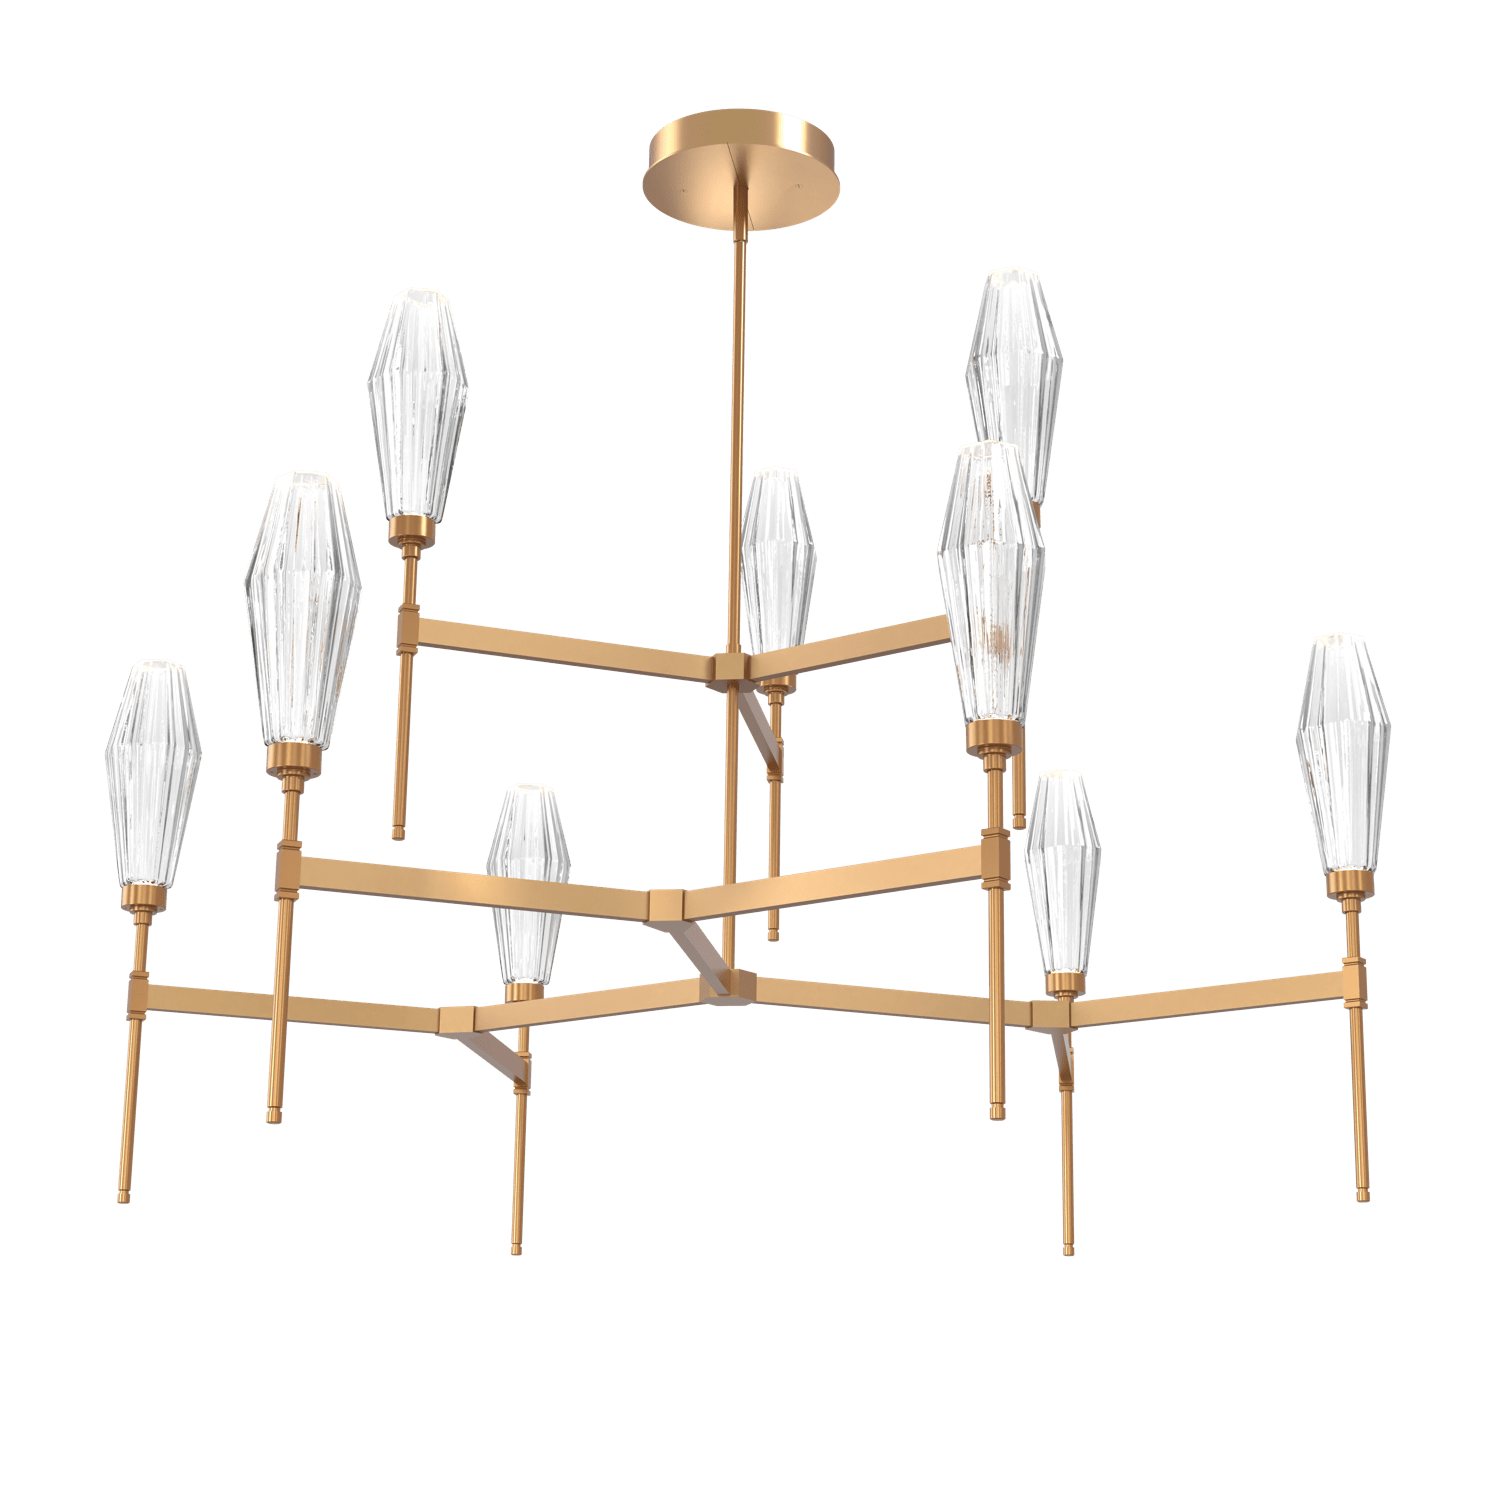 CHB0049-54-NB-RC-Hammerton-Studio-Aalto-54-inch-round-two-tier-belvedere-chandelier-with-novel-brass-finish-and-optic-ribbed-clear-glass-shades-and-LED-lamping